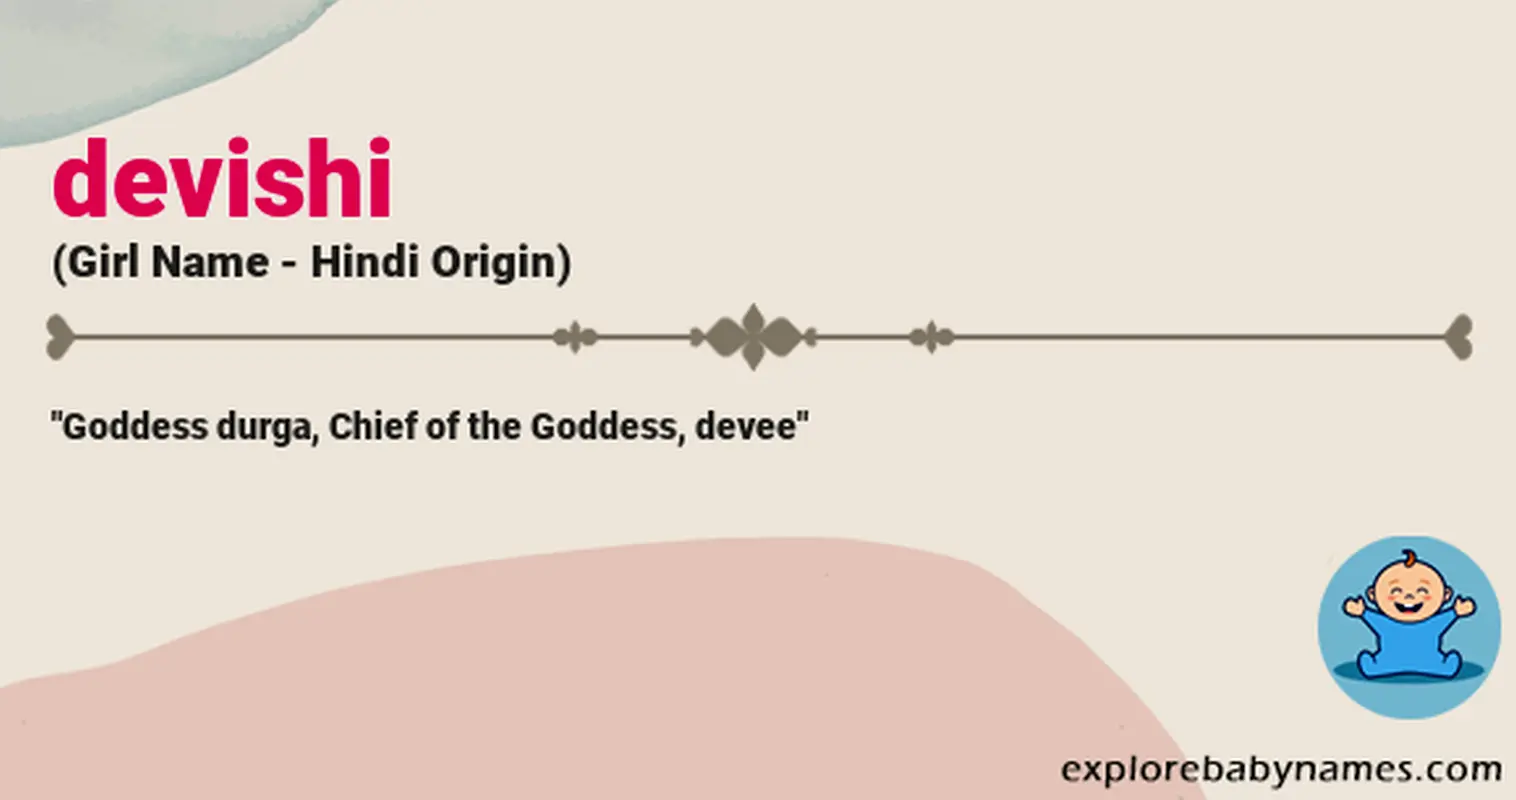 Meaning of Devishi